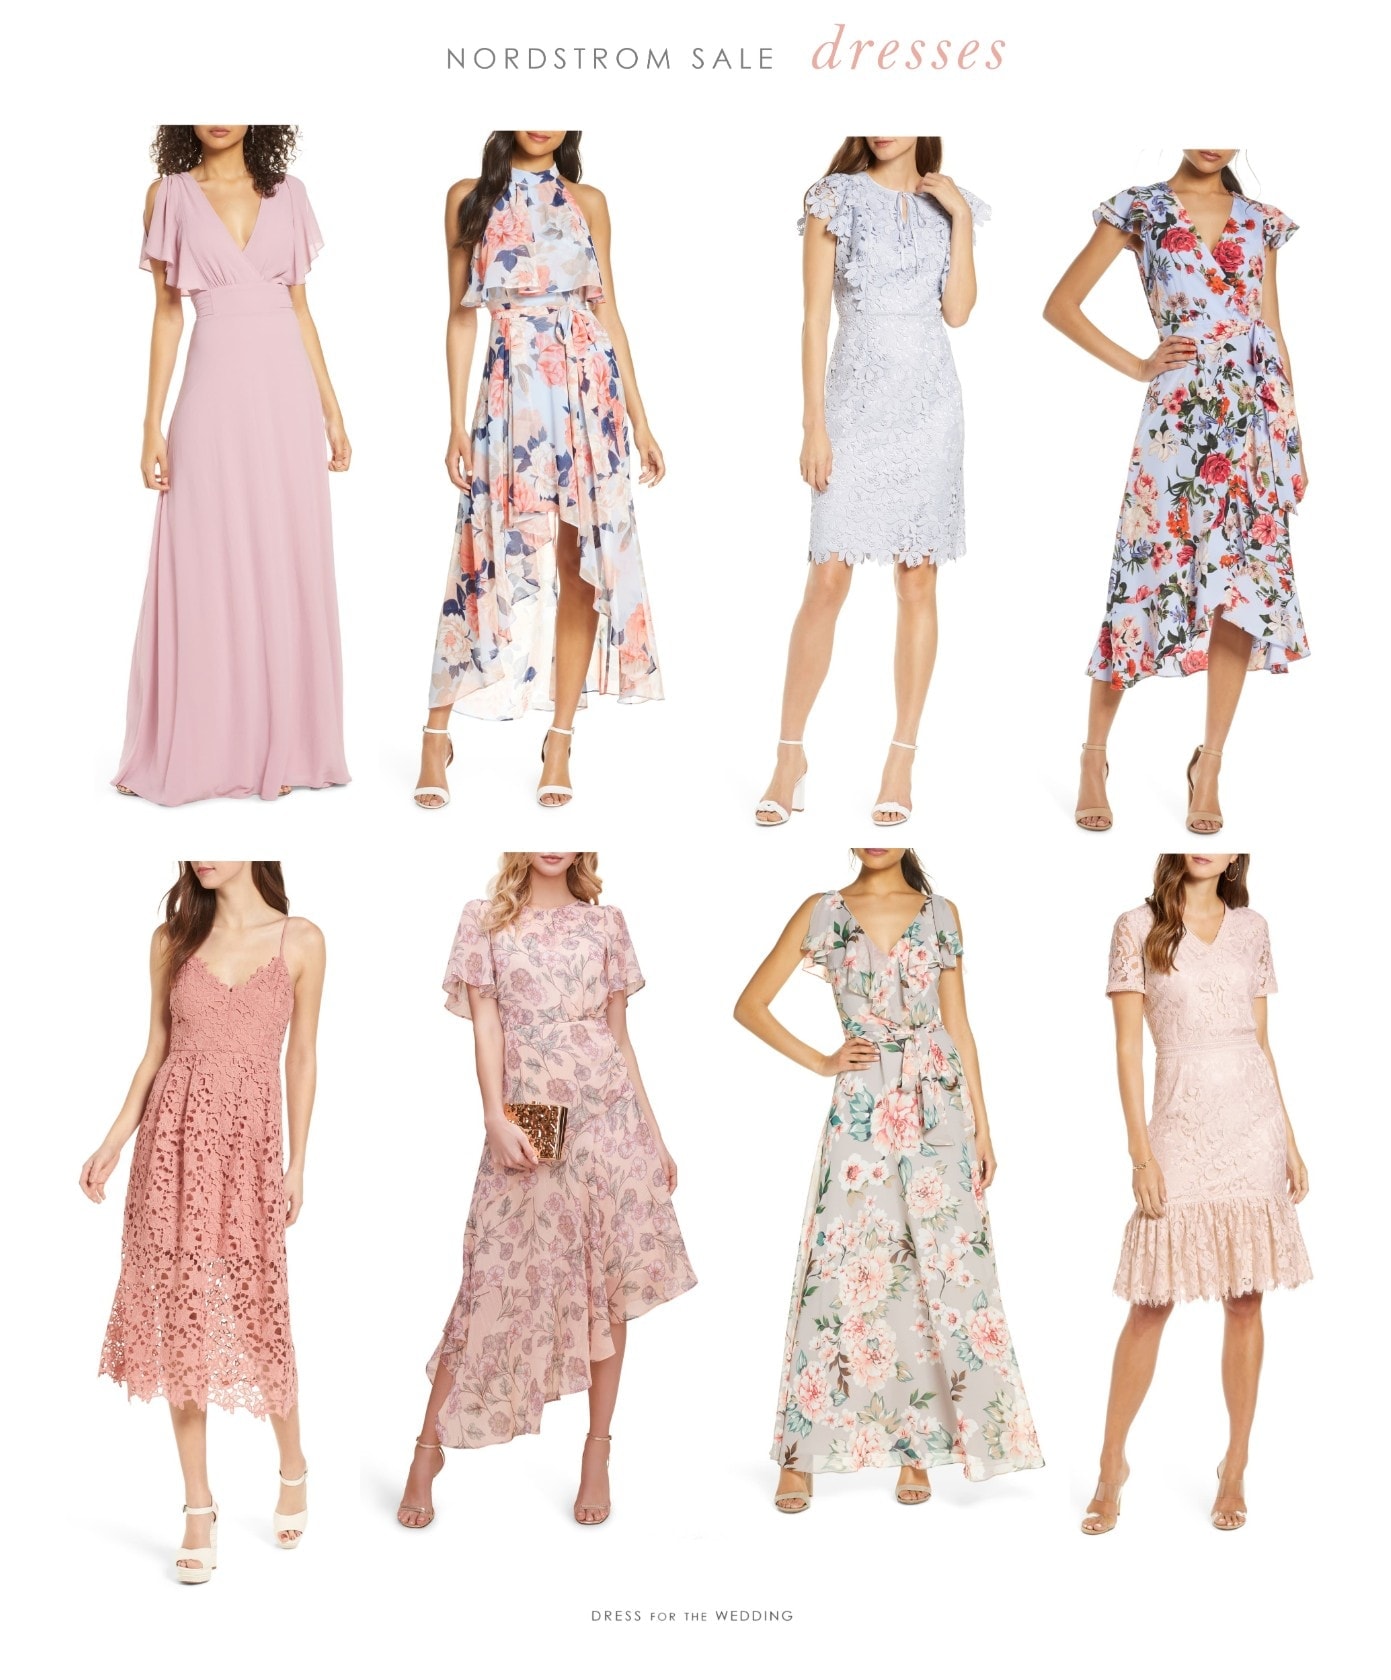 Dresses from the Nordstrom Spring Sale 2020 - Dress for the Wedding